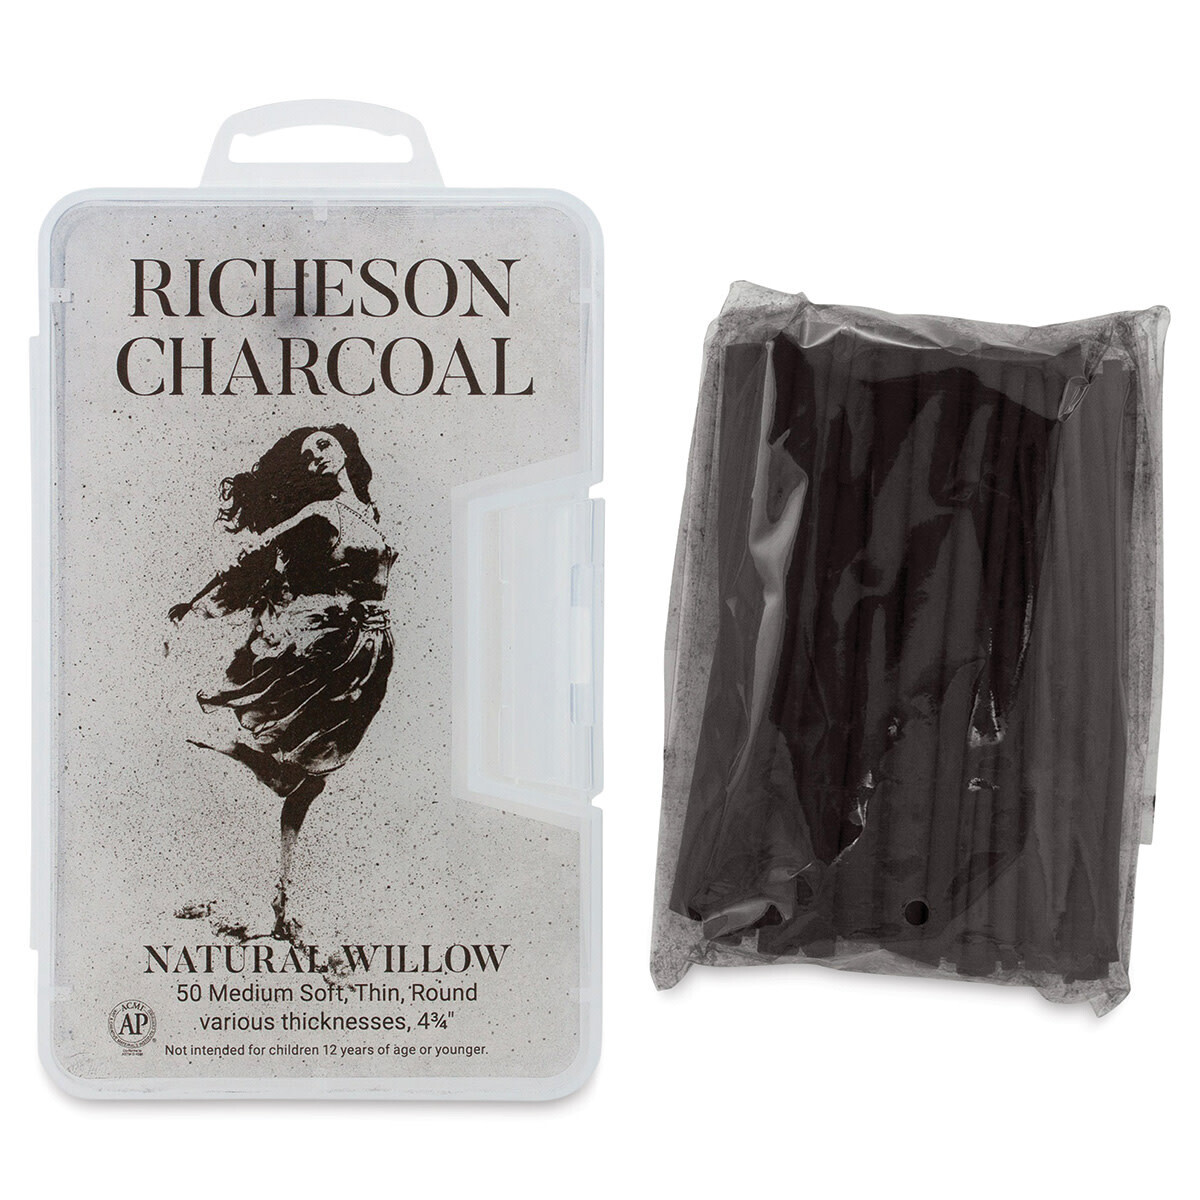 Richeson Natural Willow Charcoal in Box